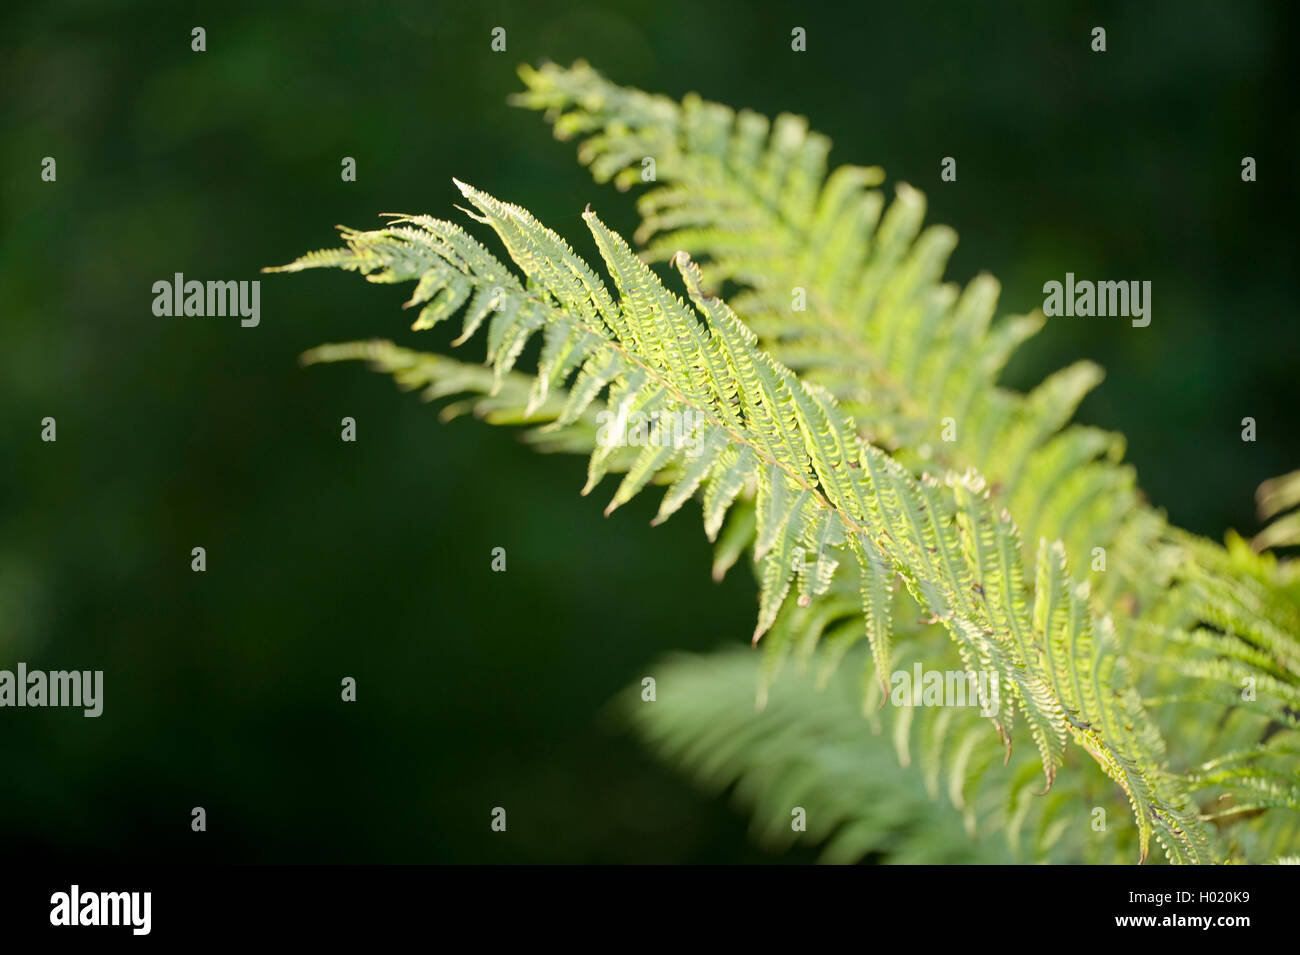 Golden Shield Fern, Scaly Male Fern (Dryopteris affinis), fronds in backlight, Germany Stock Photo